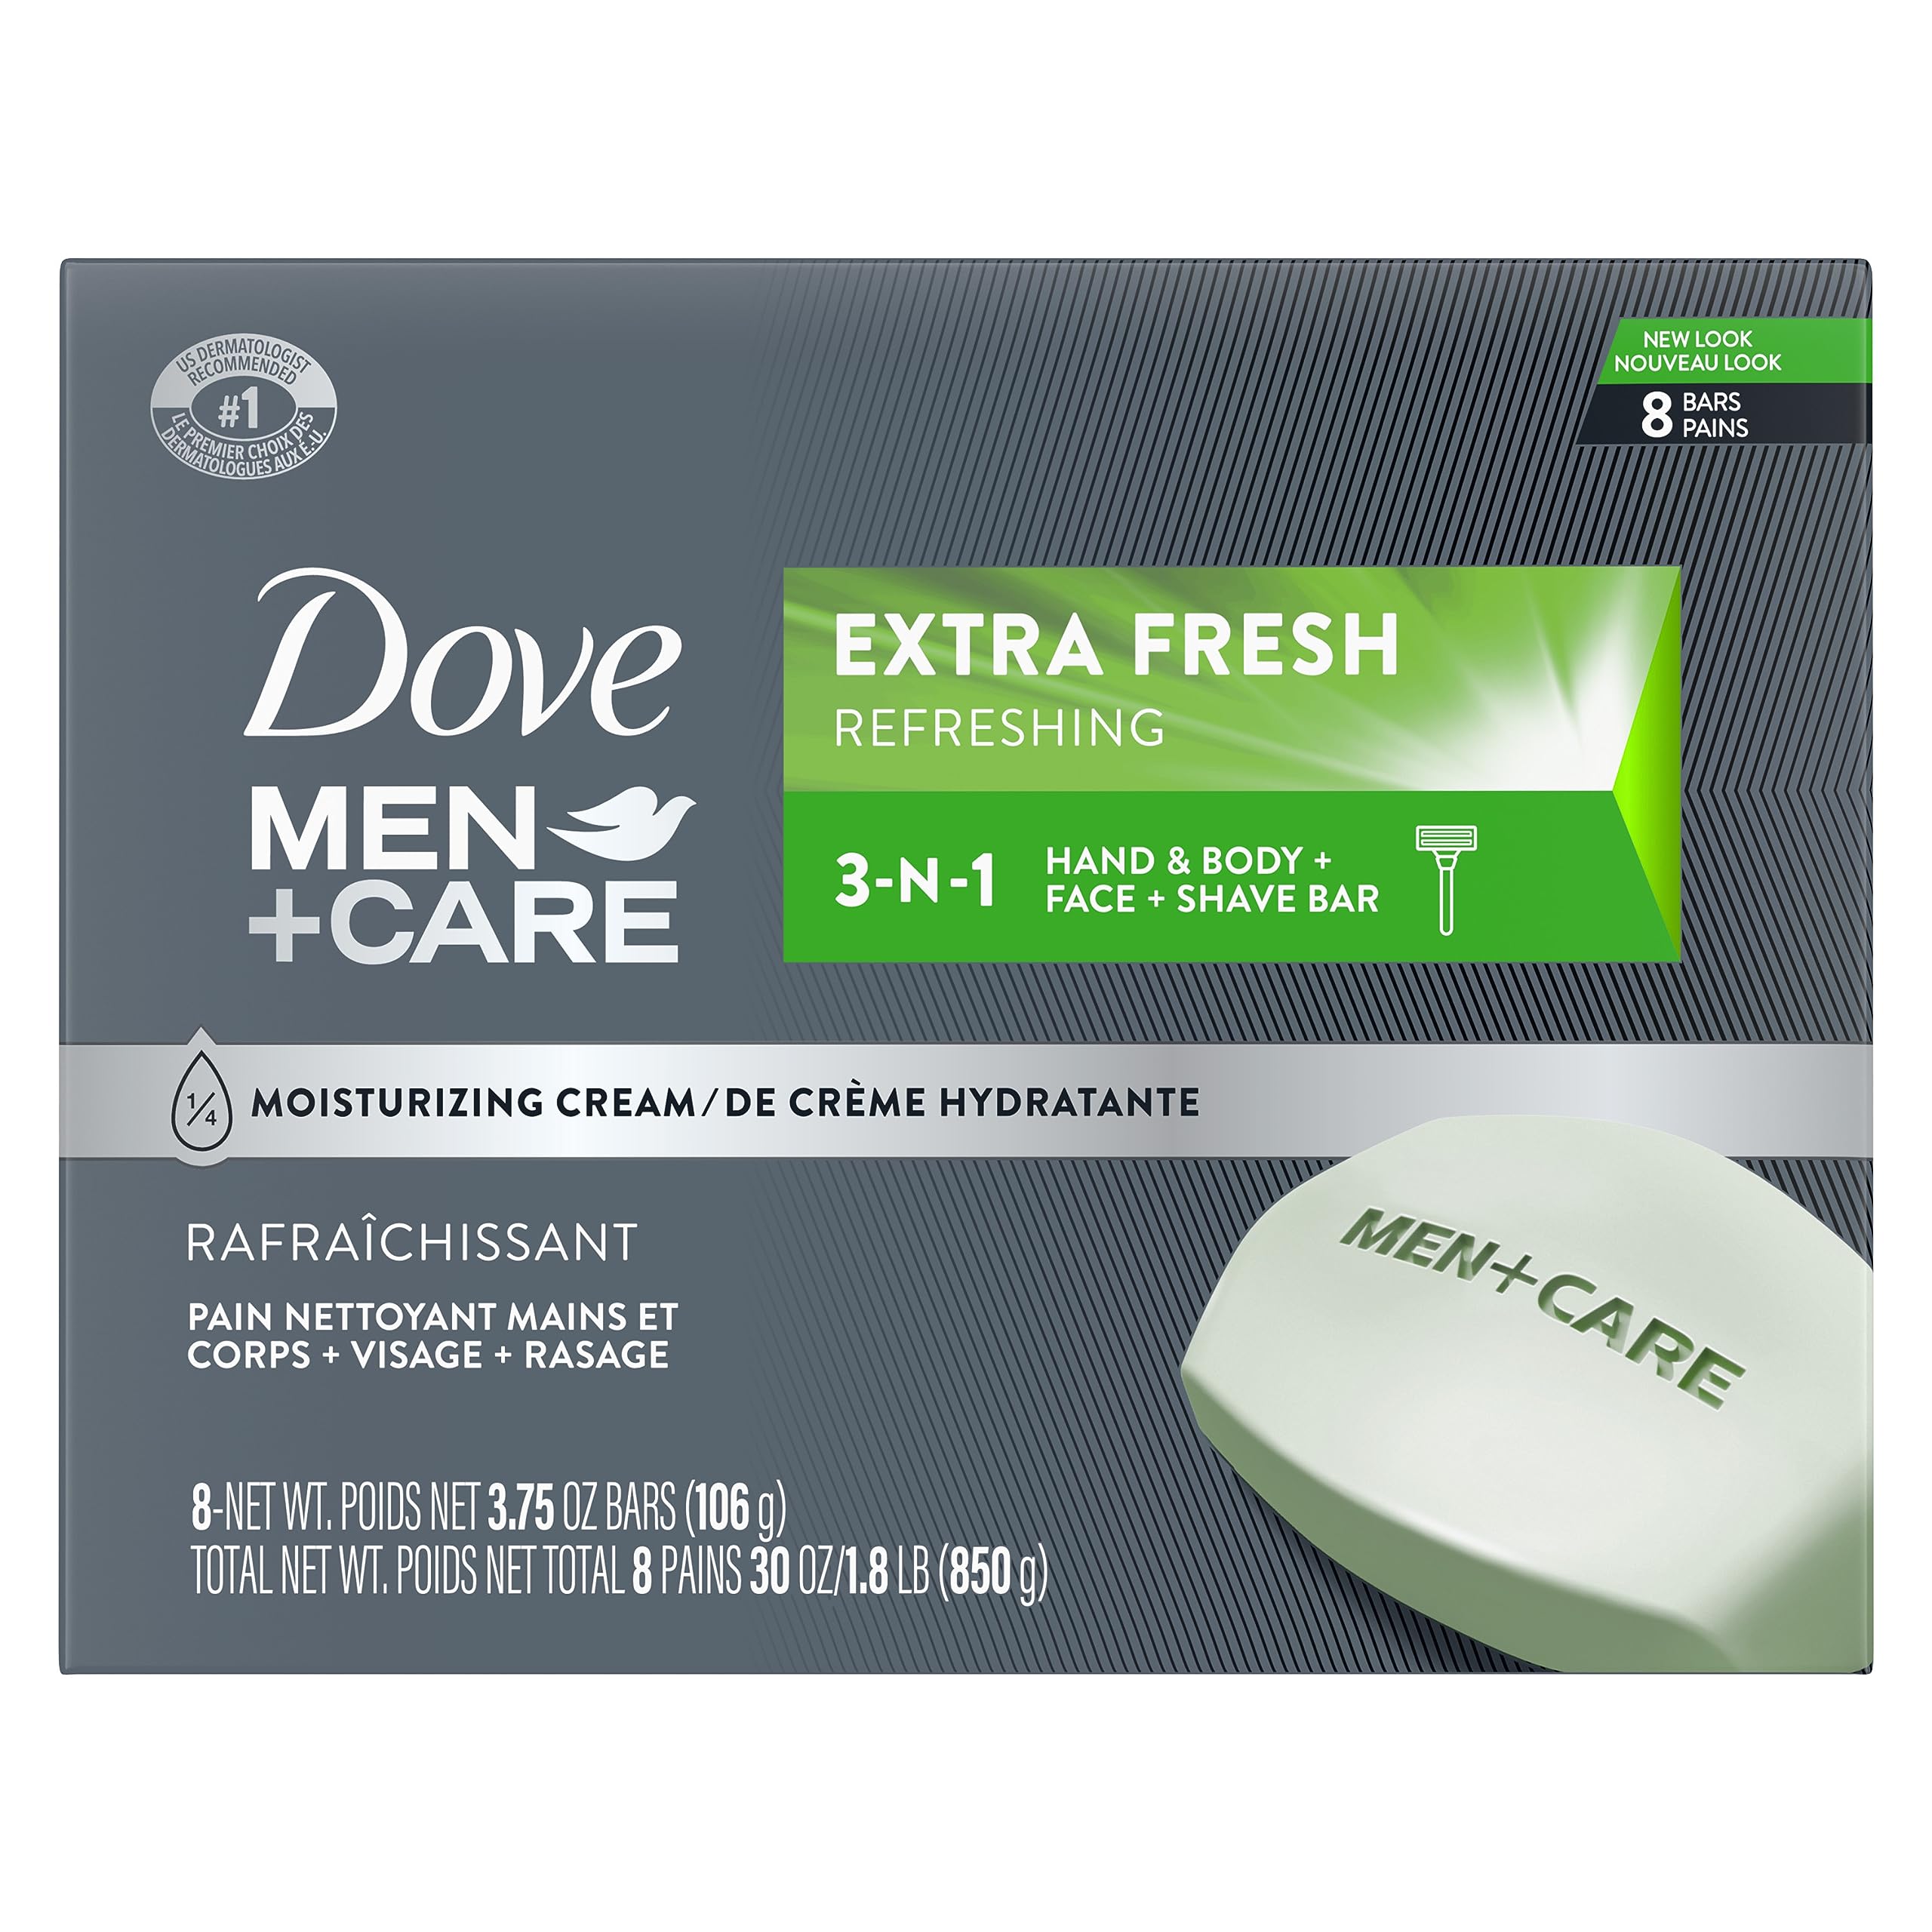 DOVE MEN + CARE 3 in 1 Bar Cleanser for Body, Face, and Shaving [3.75 Ounce (Pack of 8)] [Subscribe & Save] $8.79